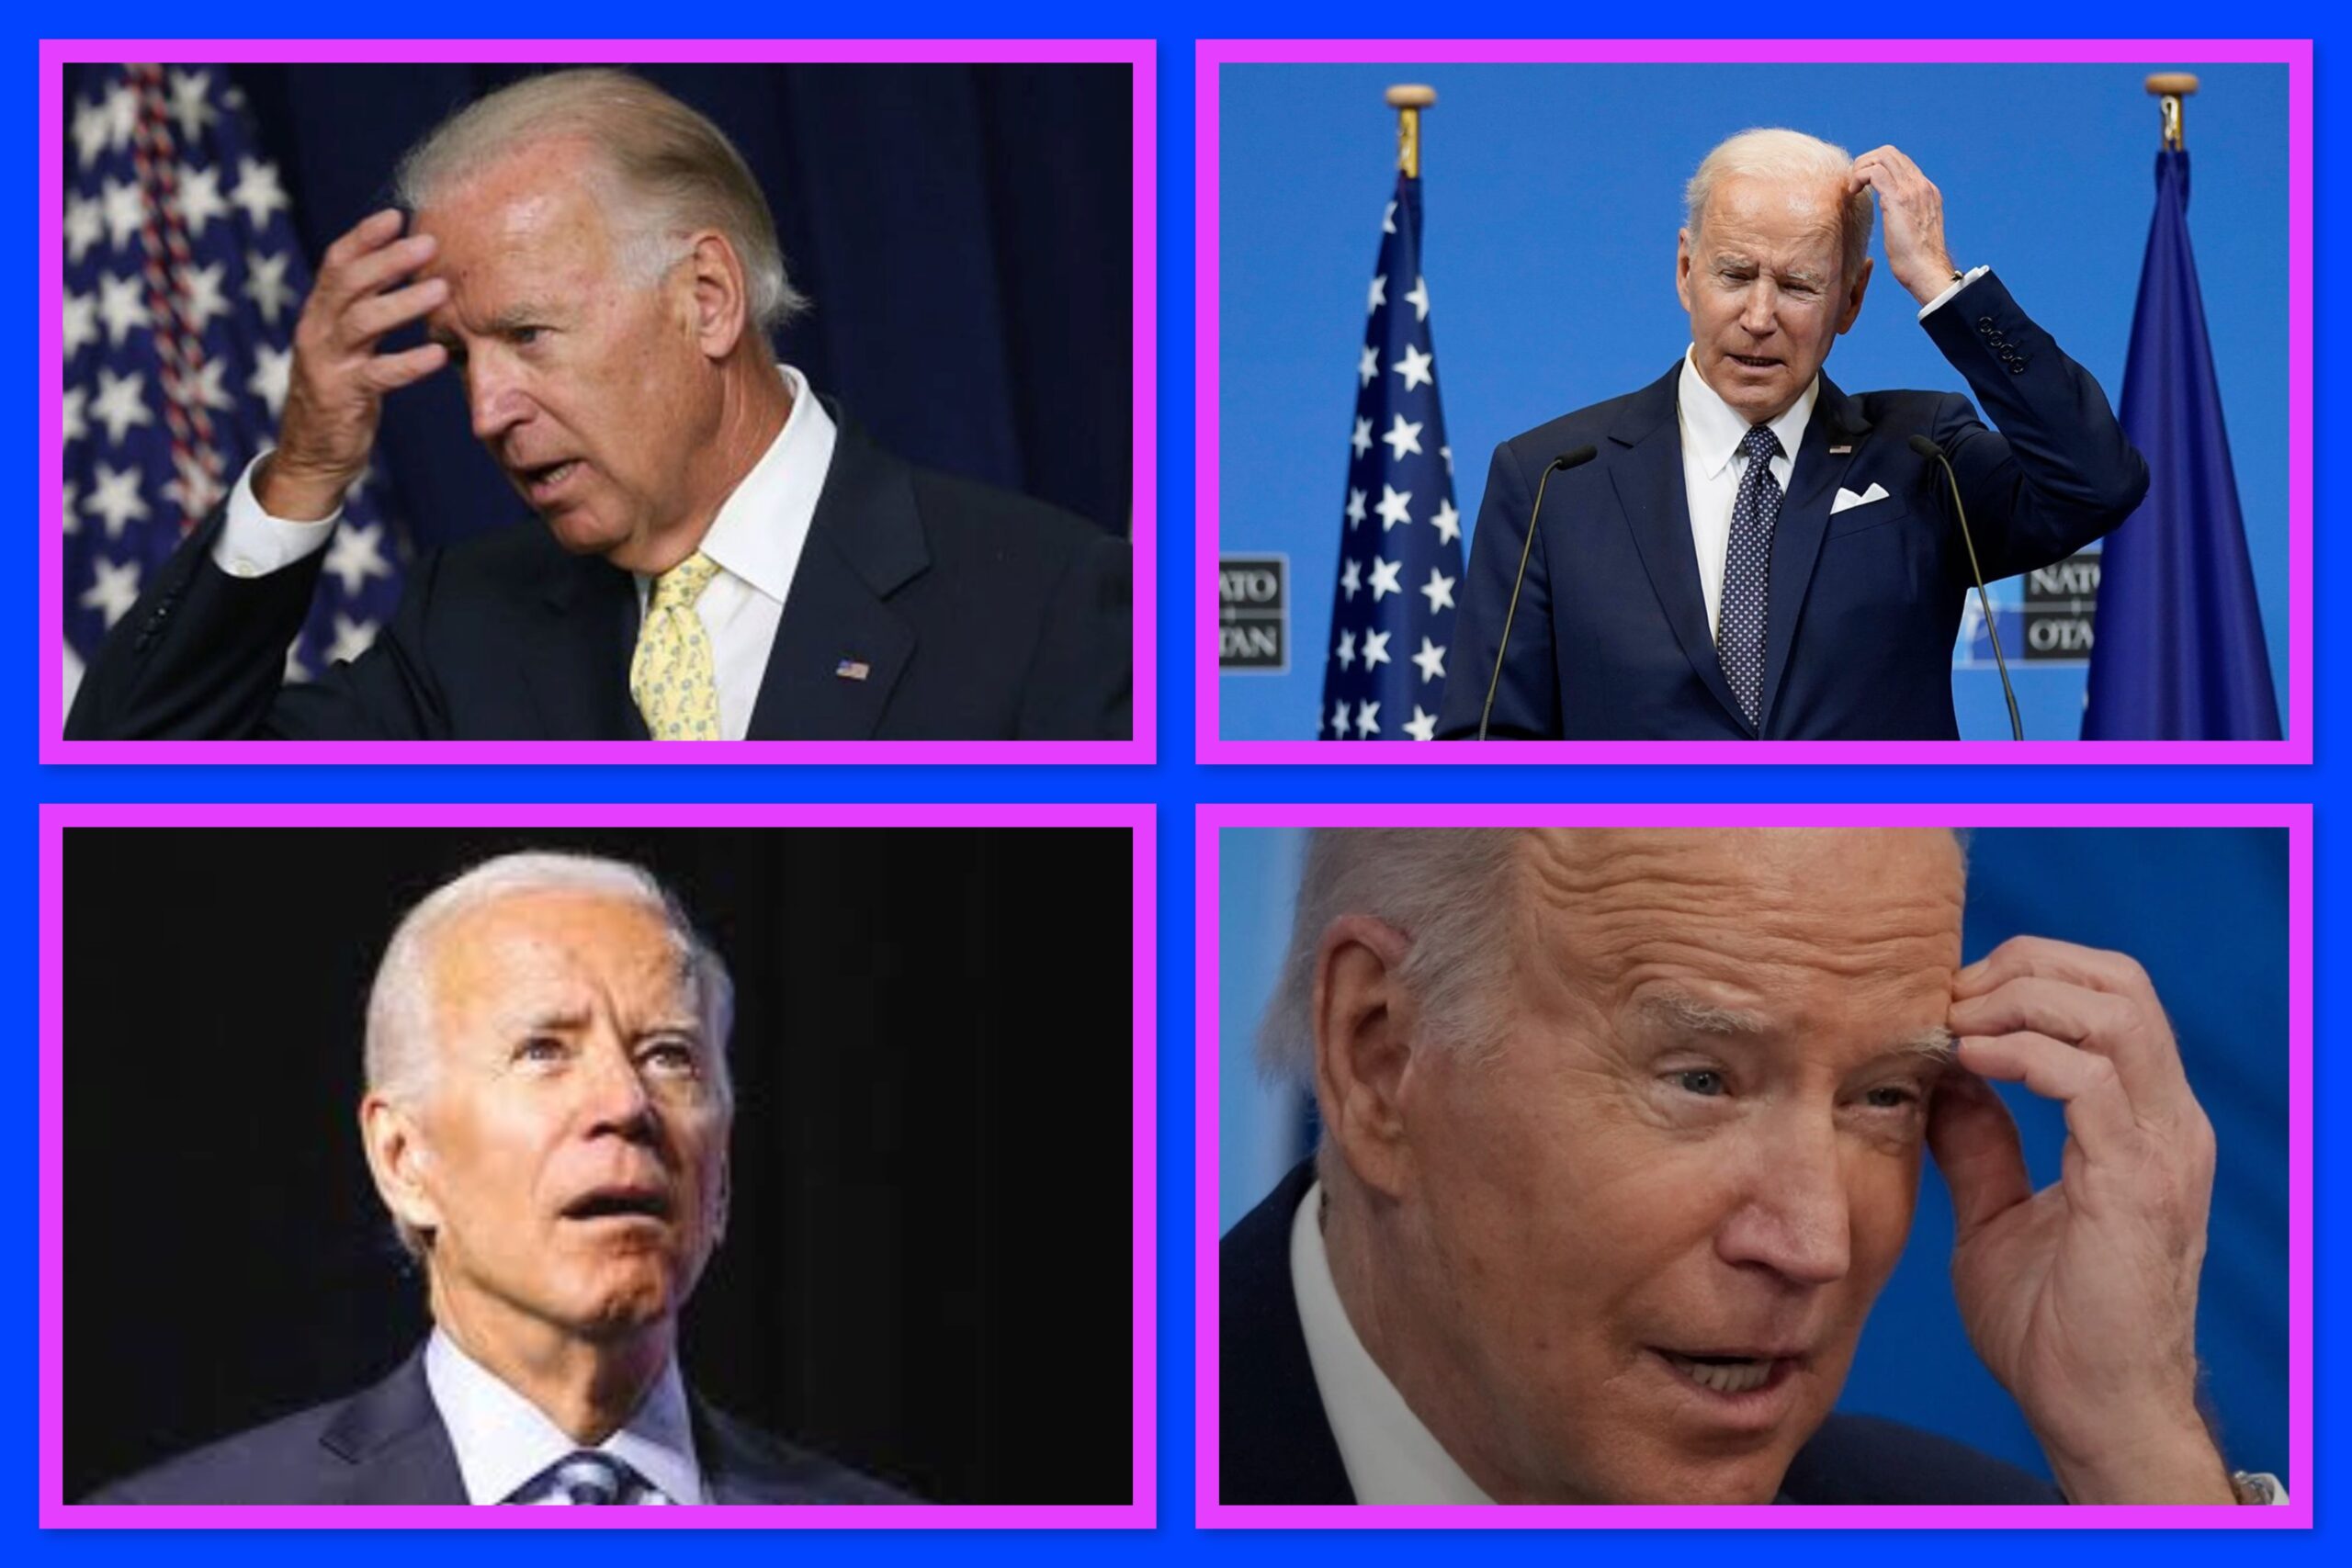 A confused President Biden